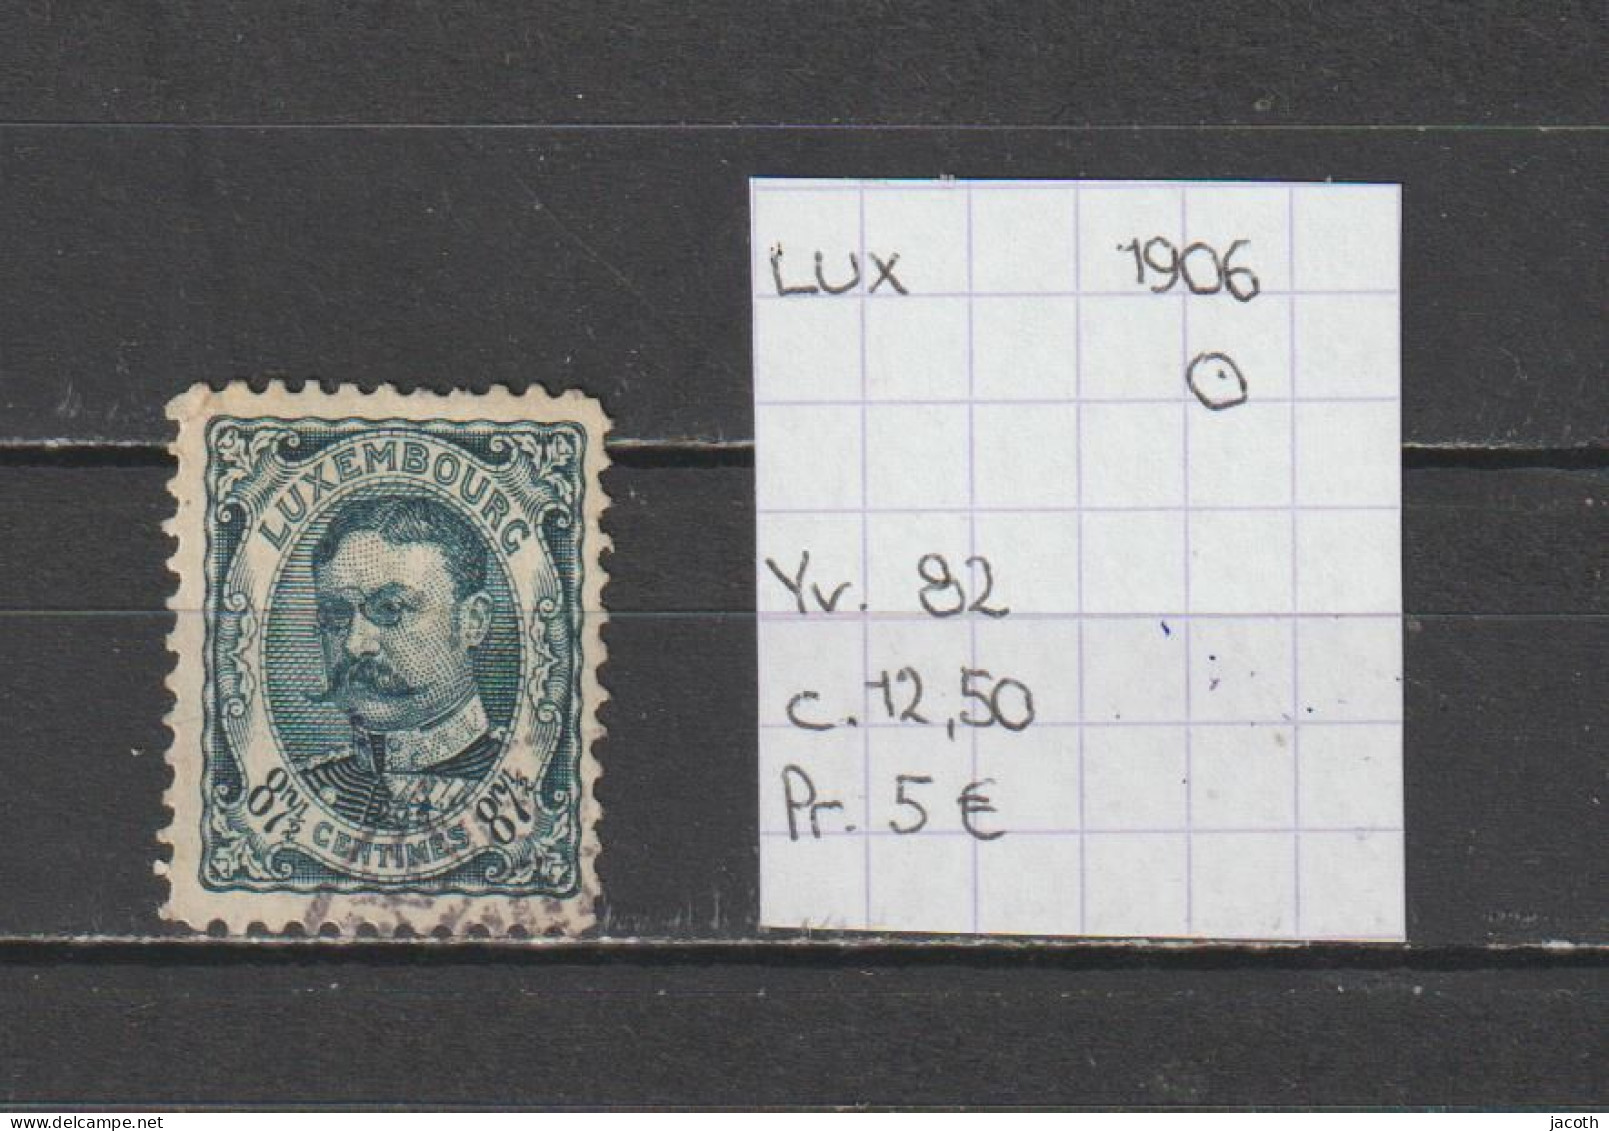 (TJ) Luxembourg 1906 - YT 82 (gest./obl./used) - 1906 Guillermo IV